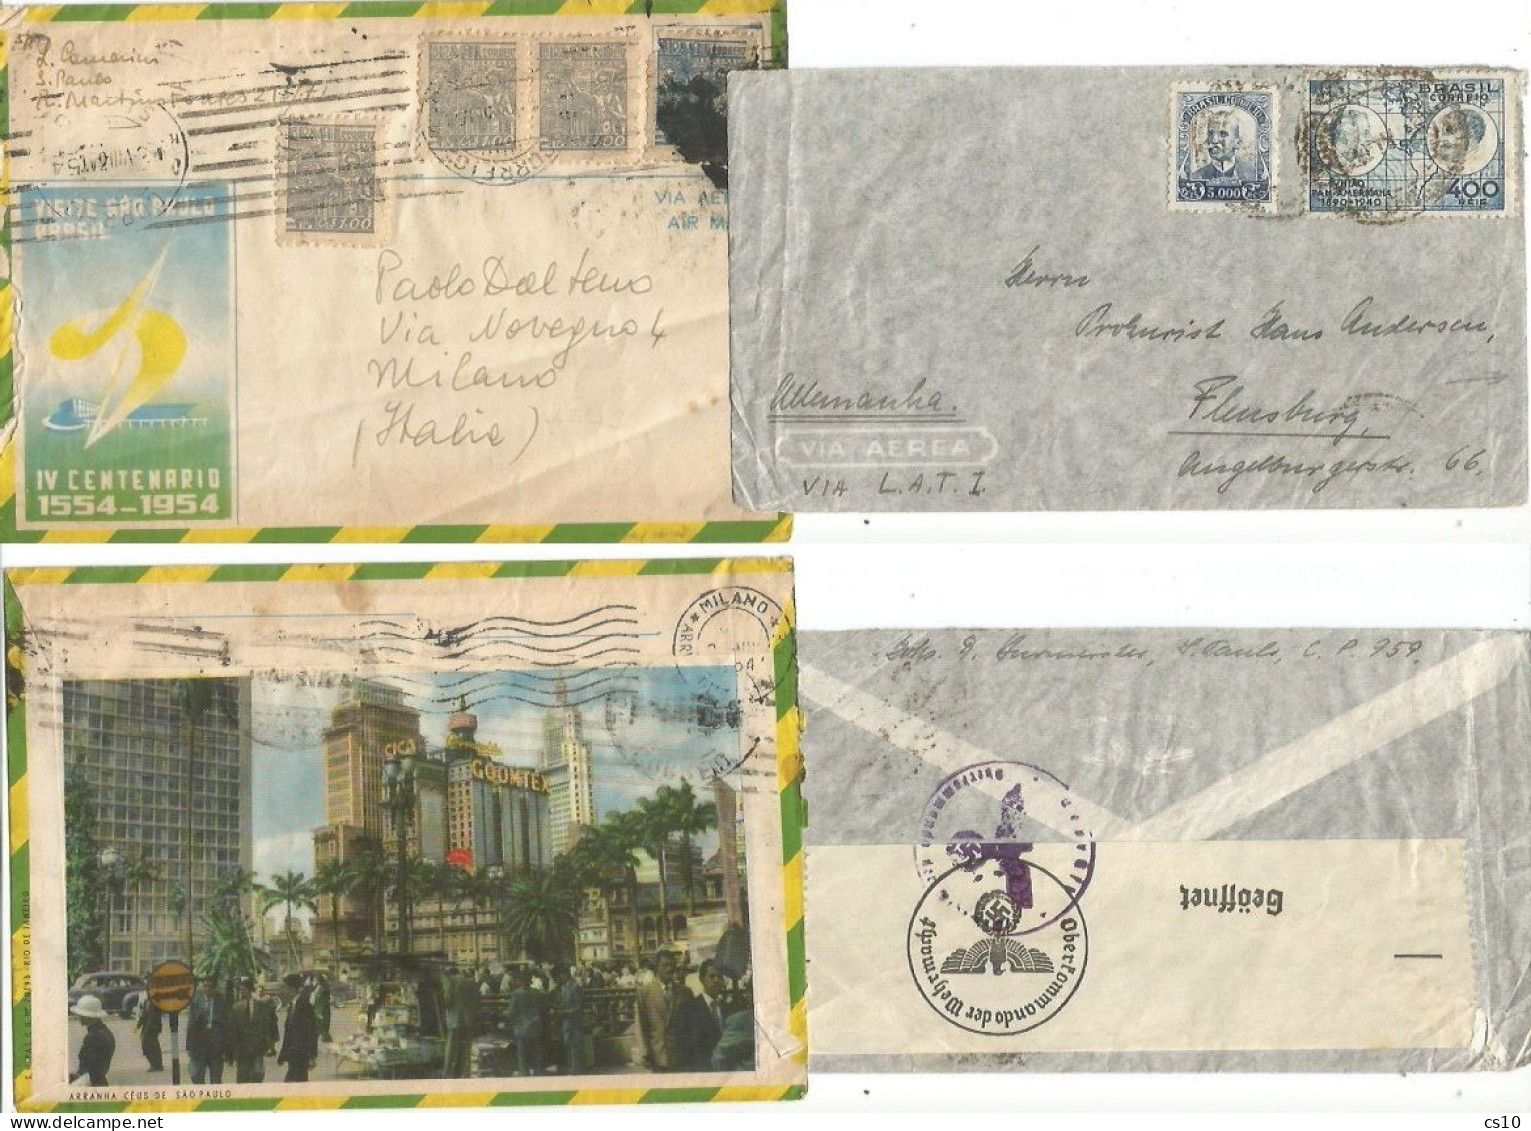 Brasil Brazil Nice Postal History lot in 17 CVs incl. Taxed P.Due 1896 + Aerograms to Europe with good frankings